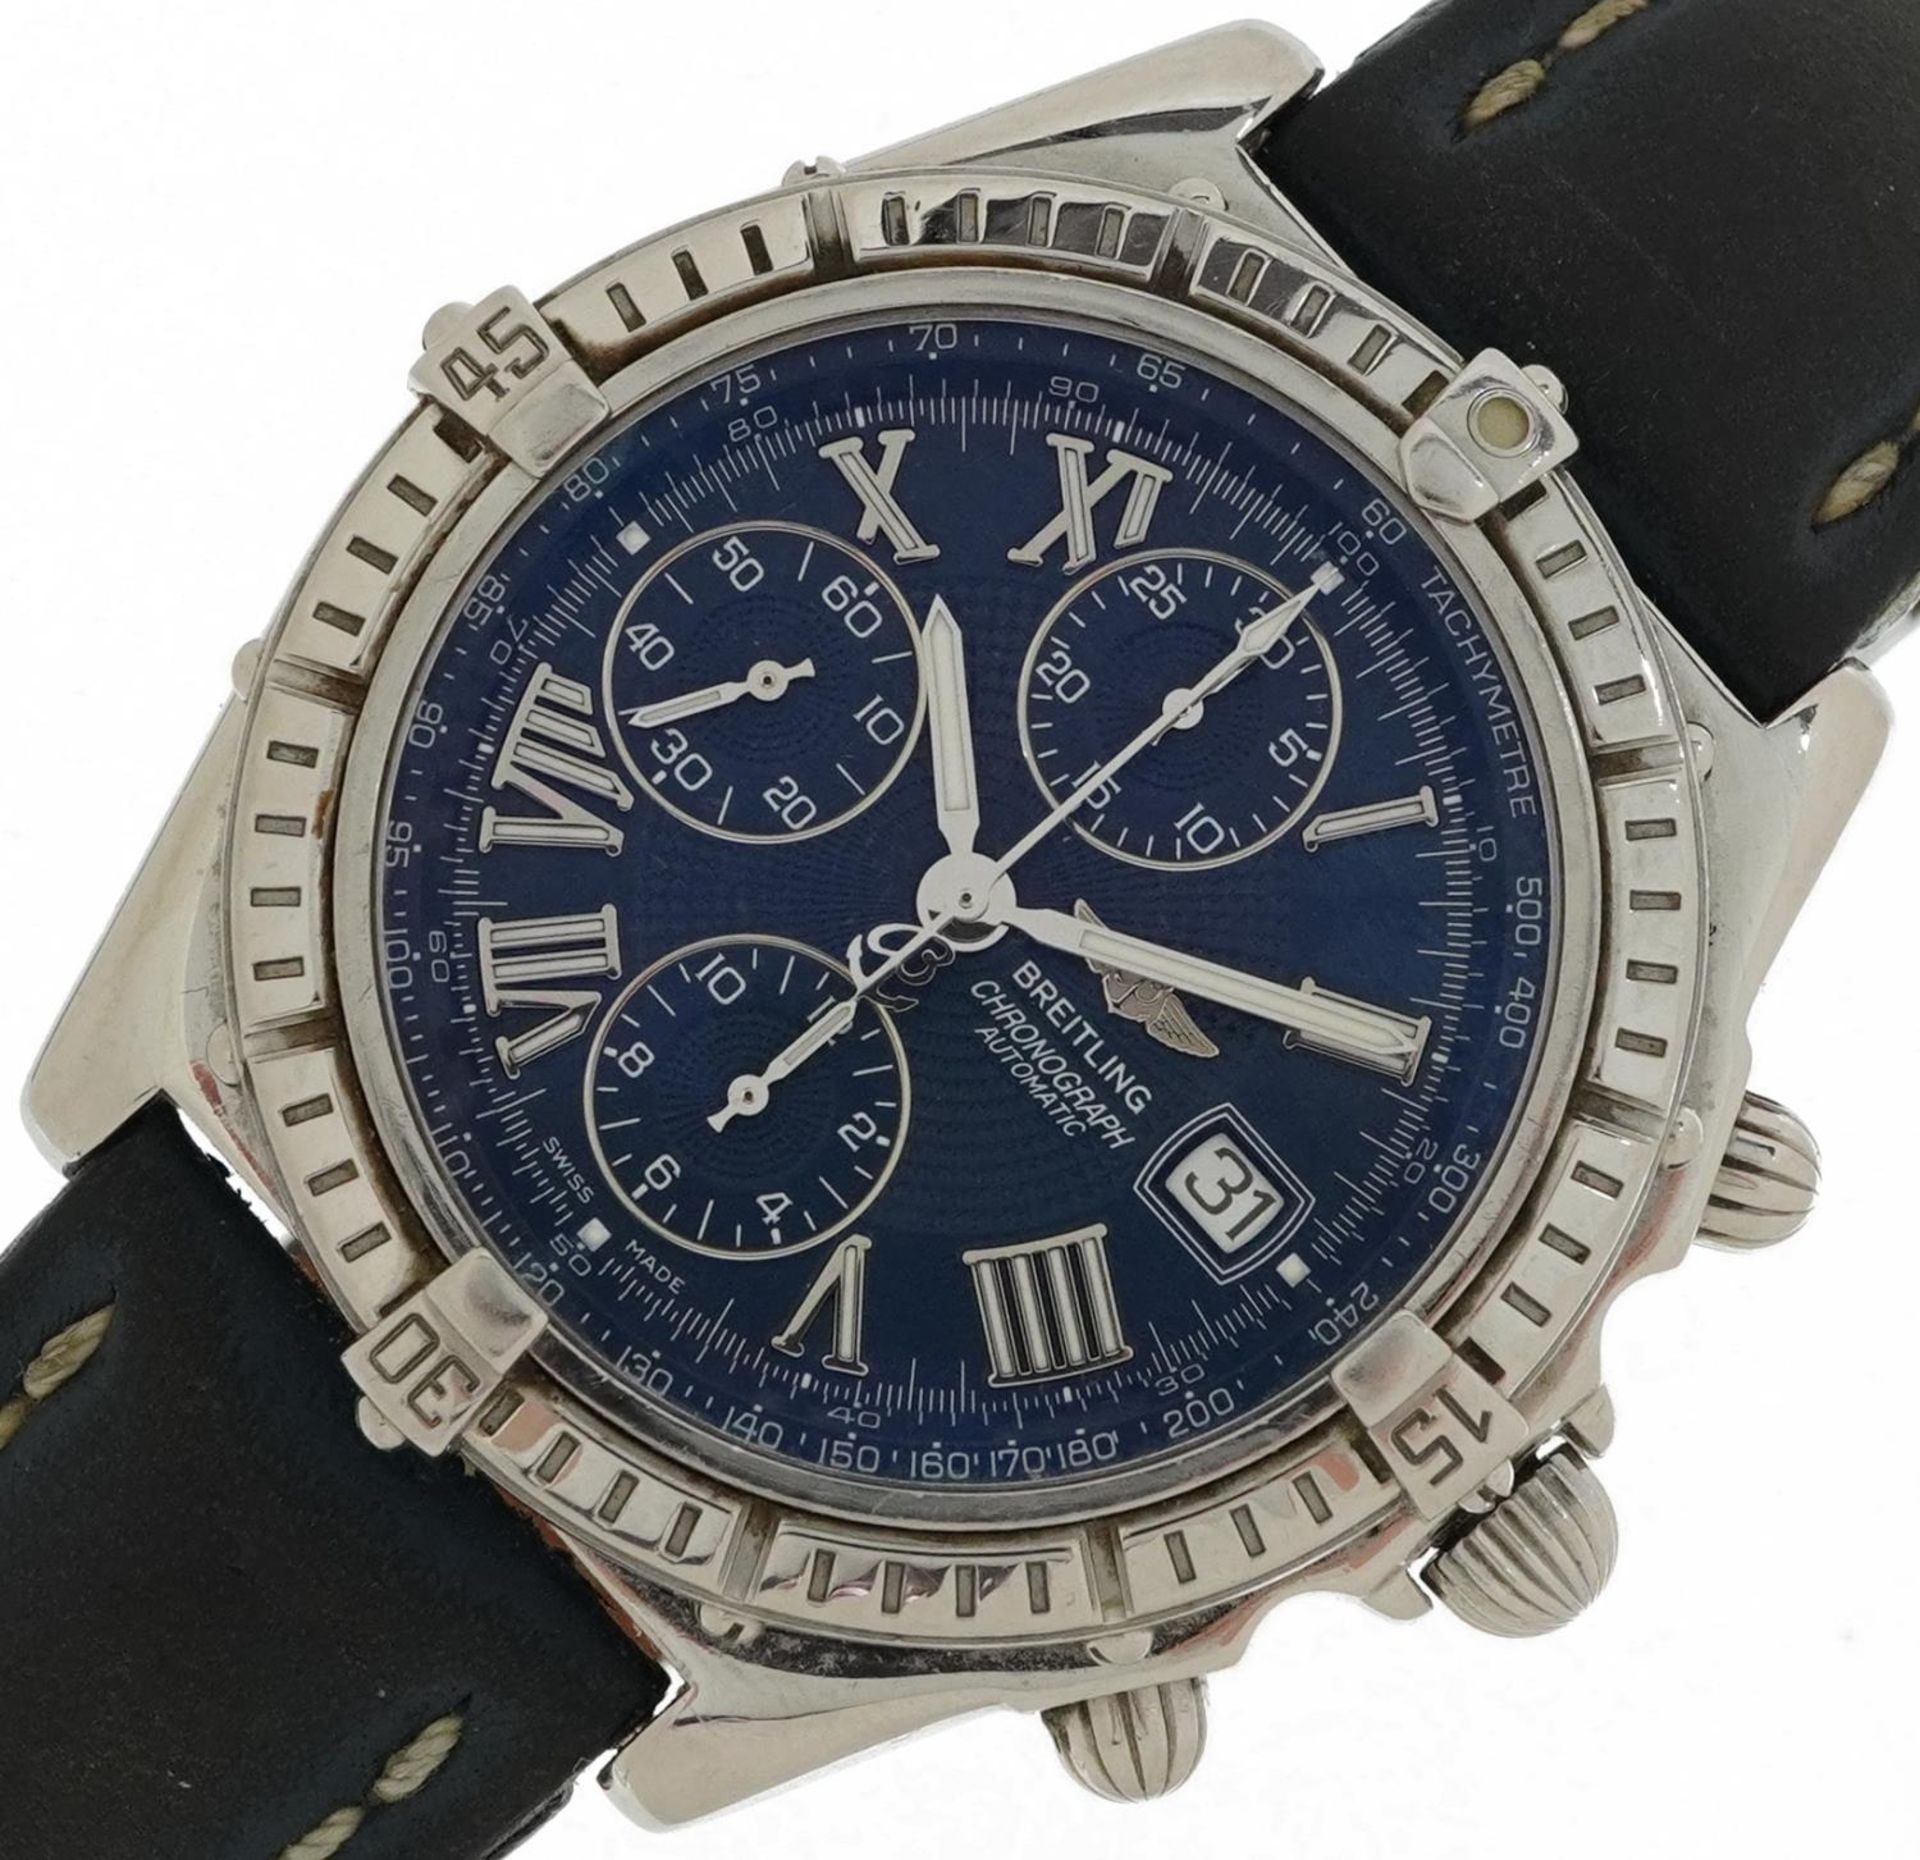 Breitling, gentlemen's Super Ocean Heritage 42 chronograph automatic wristwatch with date - Image 2 of 7